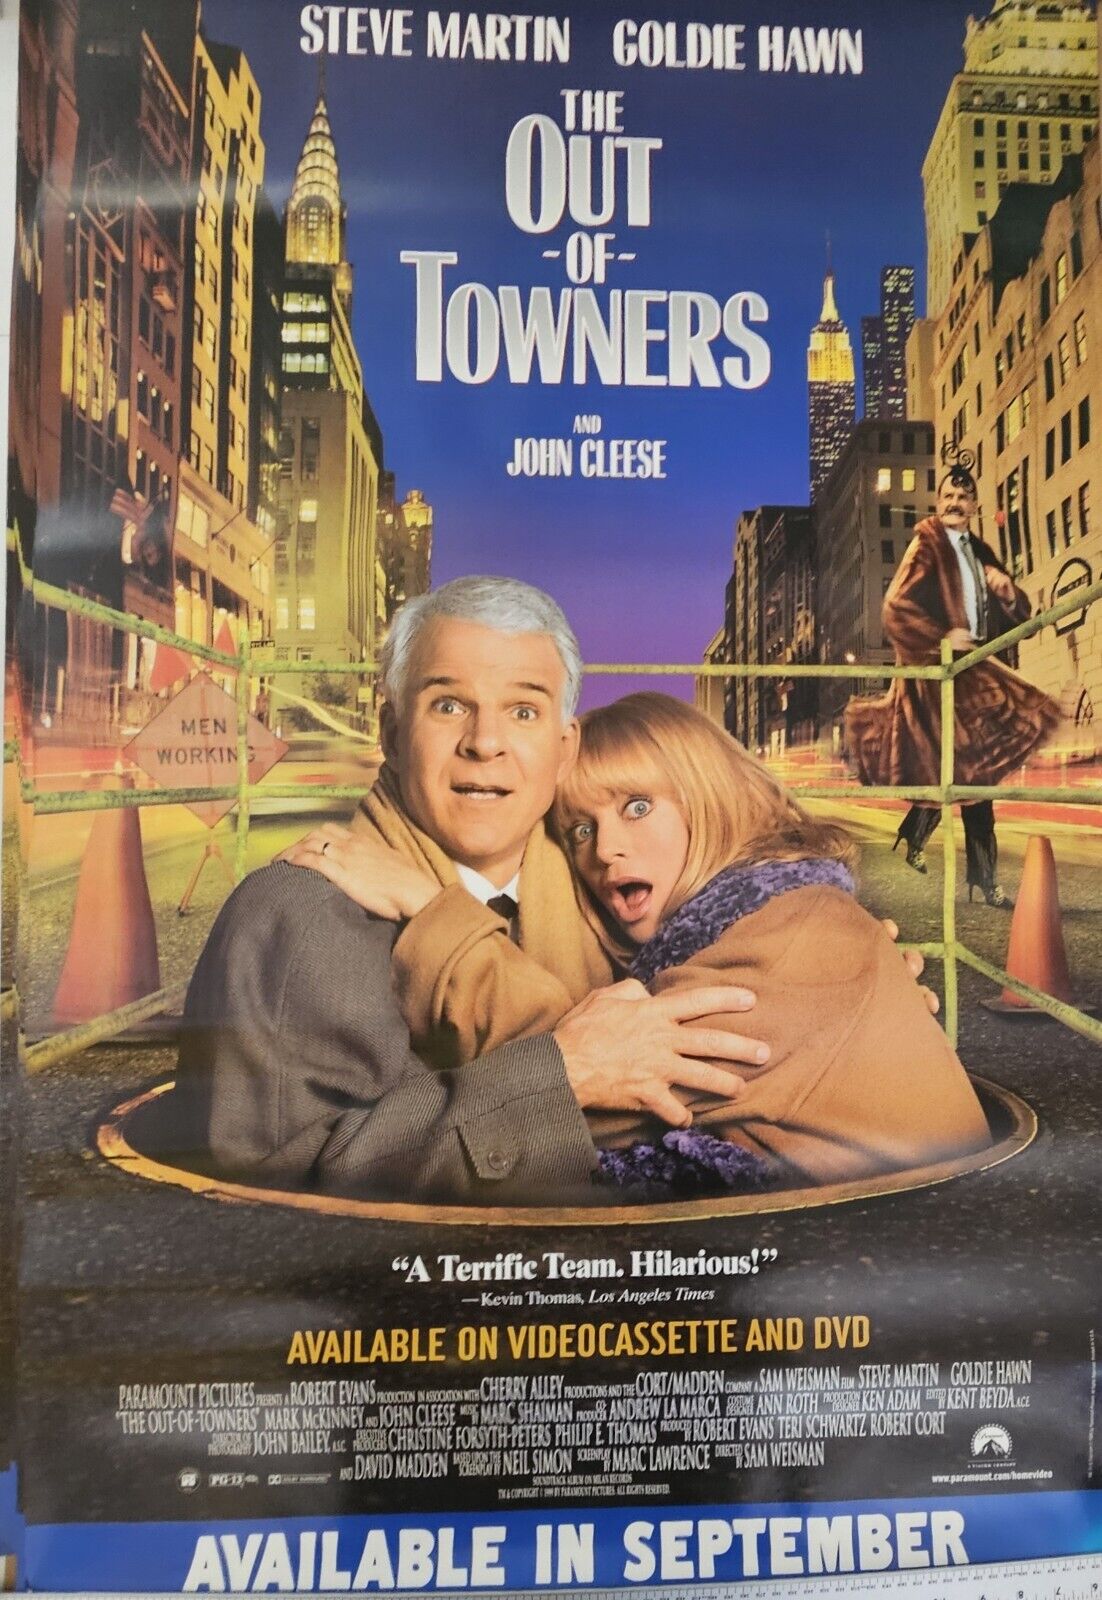 Steve Martin and Goldie Hawn in The Out Of Towners 41.5 x 27  DVD movie poster